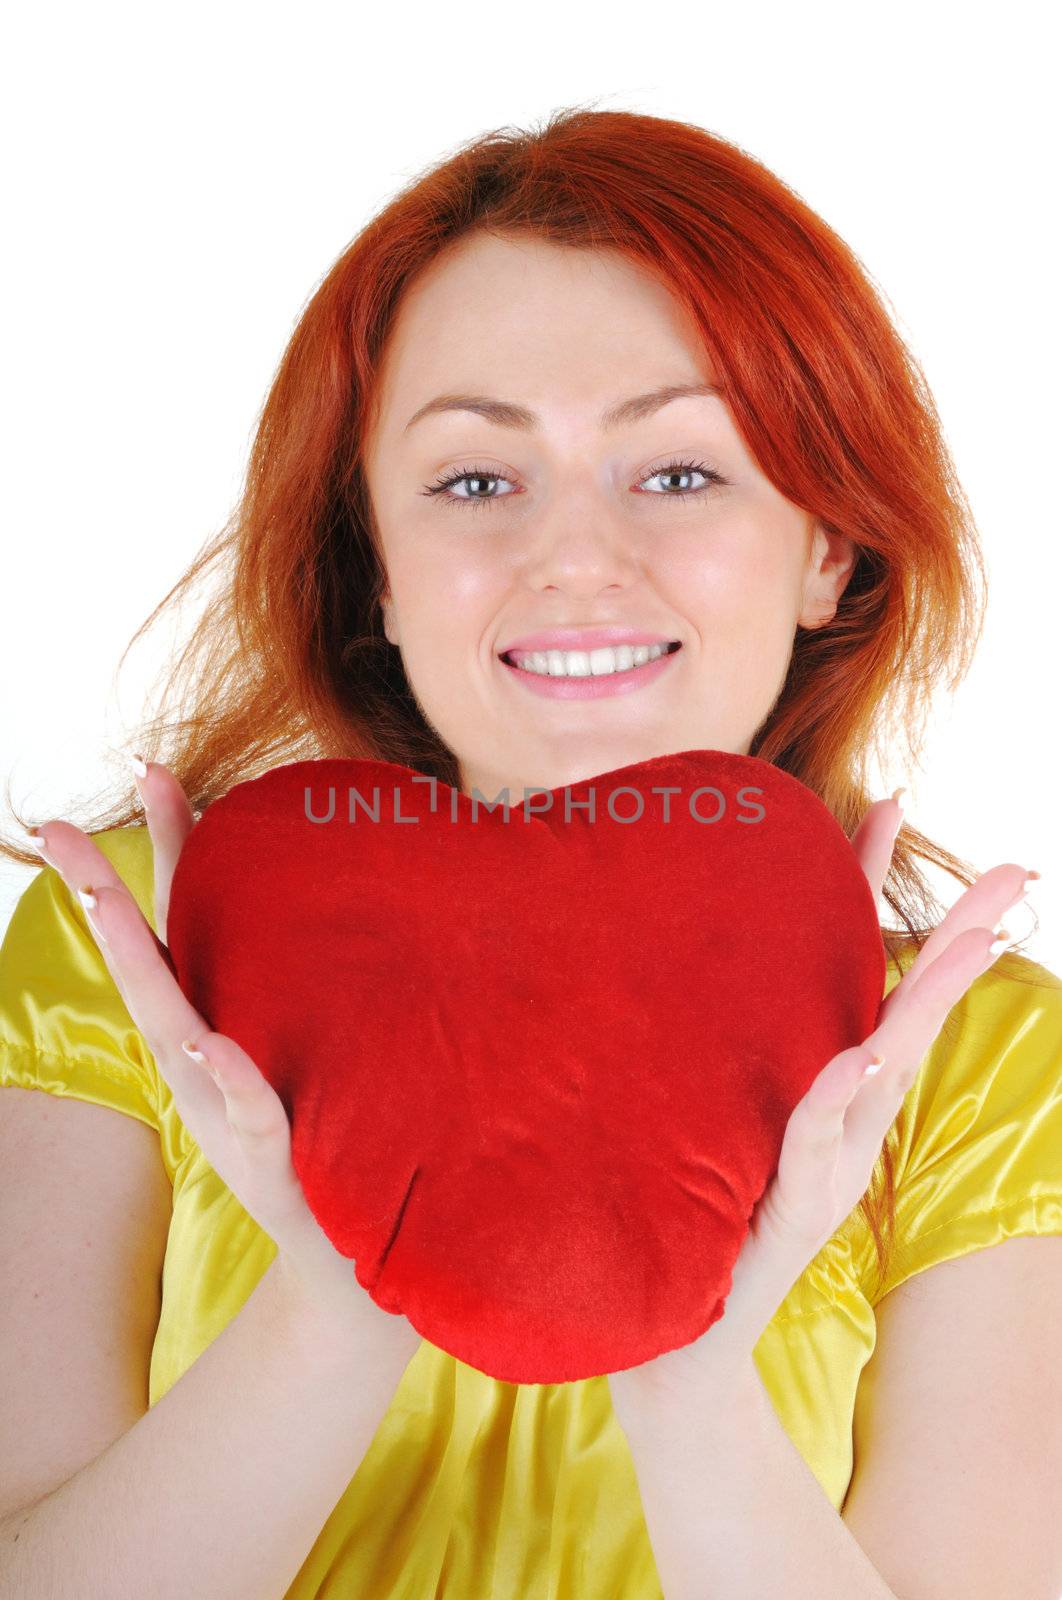 Young beautiul woman with red heart in her hands on white background. Focus on woman's eyes.